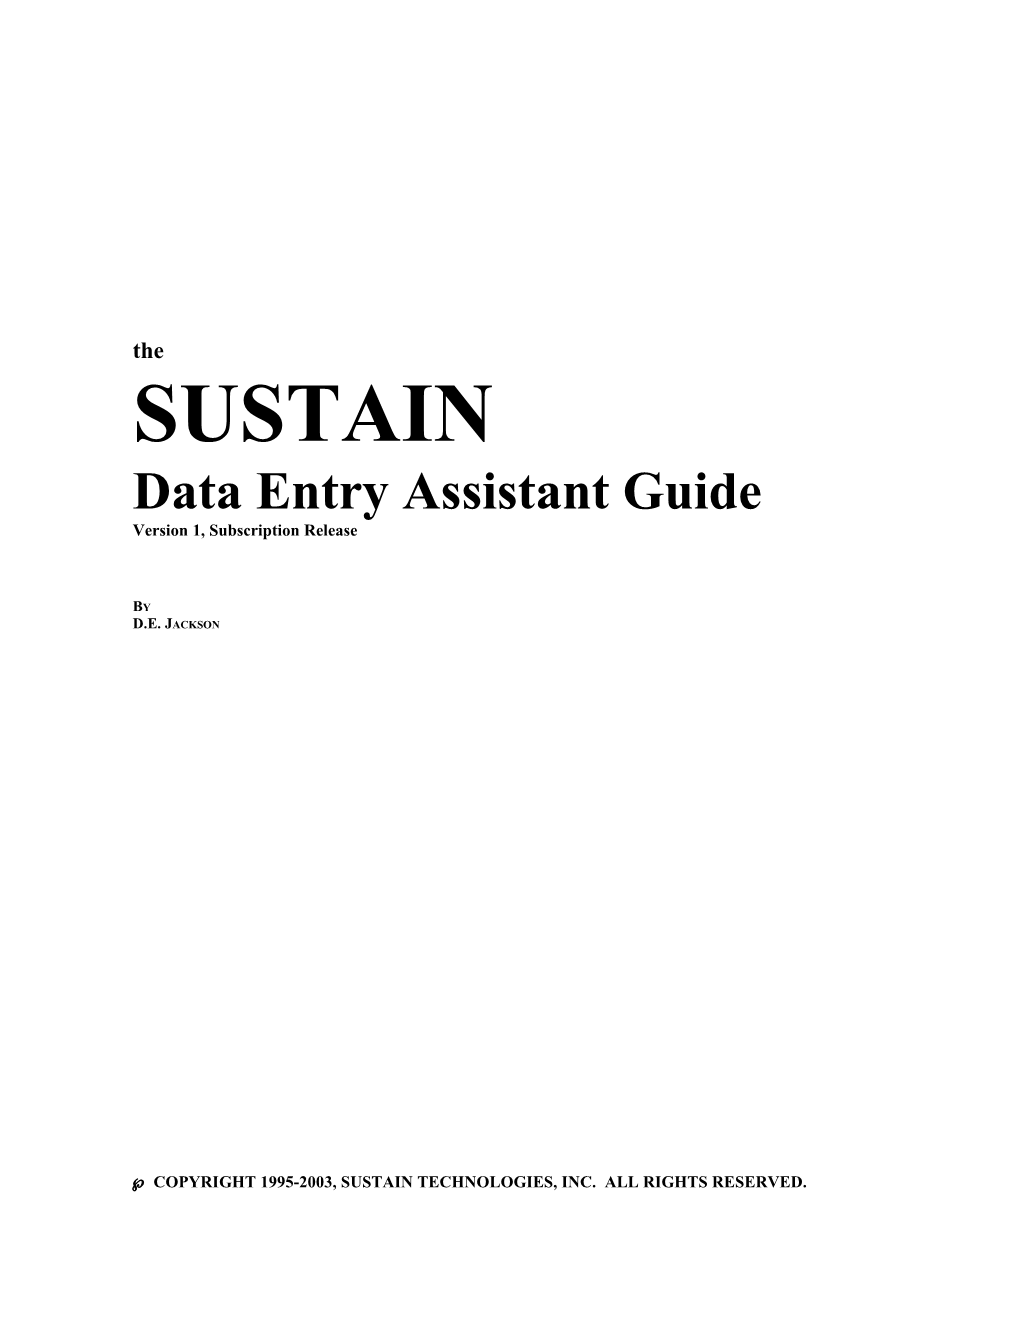 The SUSTAIN Data Entry Assistant Guide